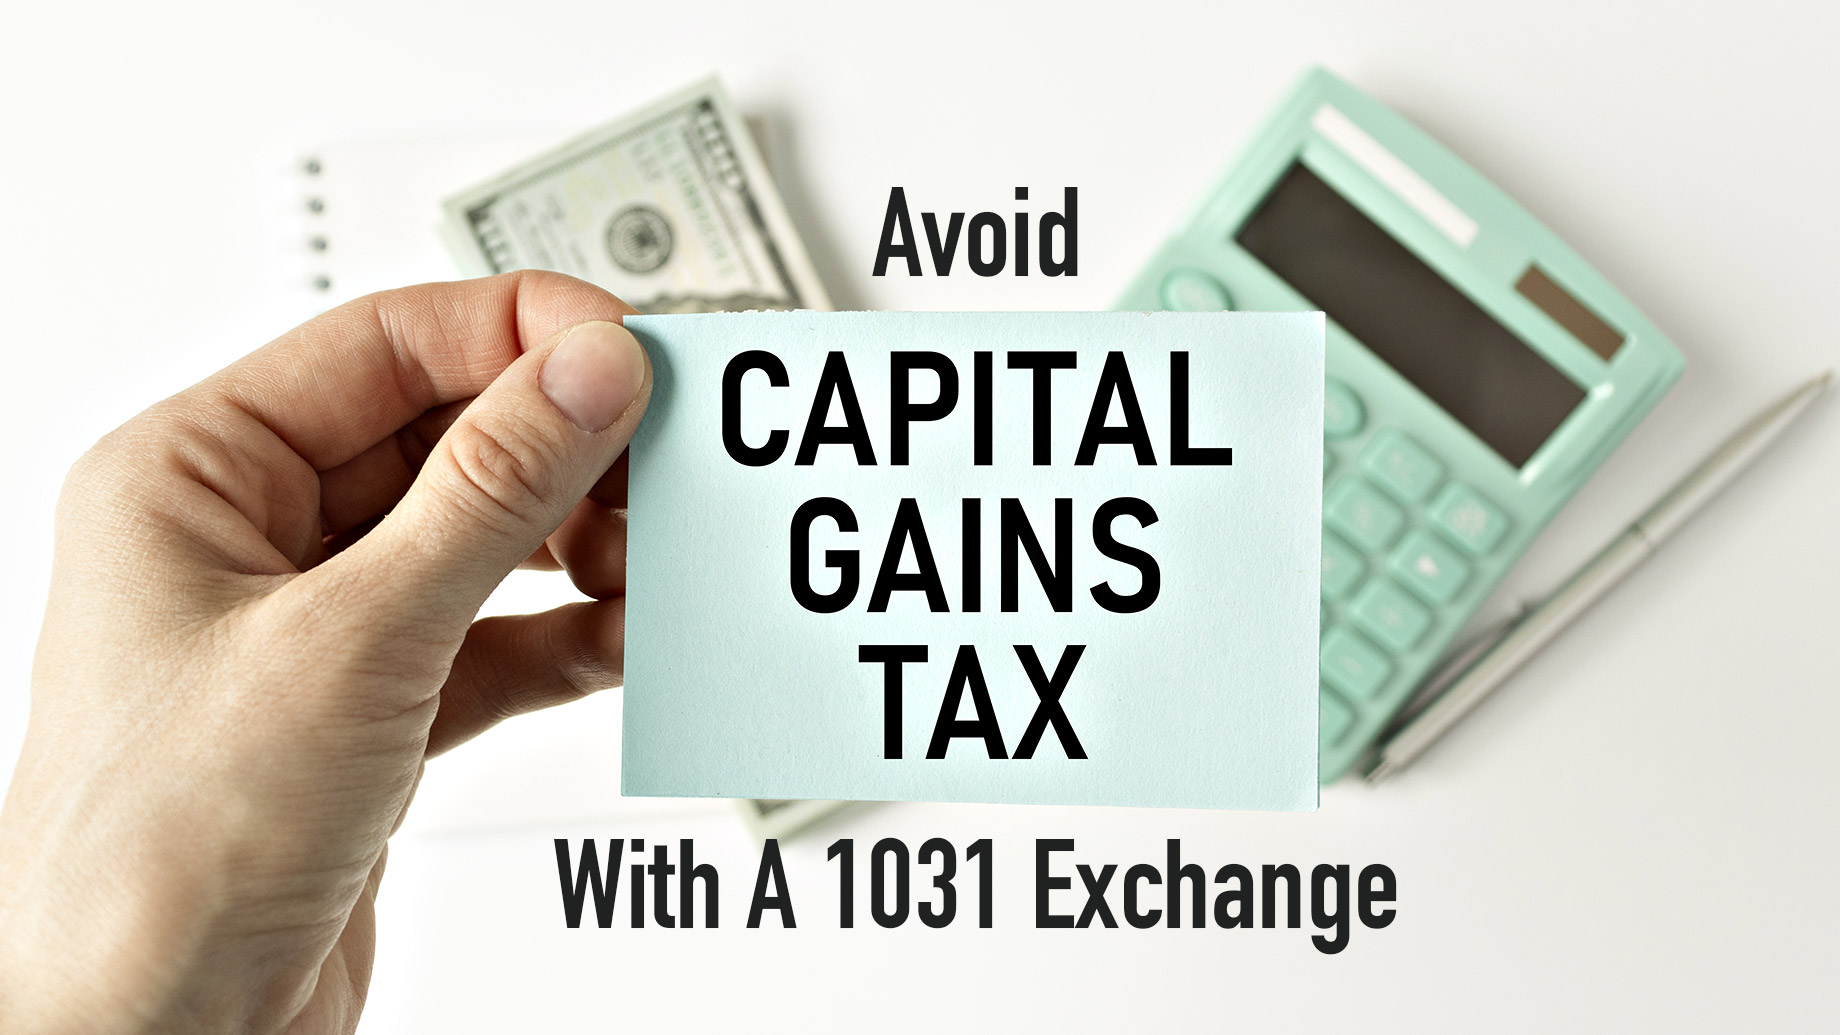 Avoid Capital Gains Taxes With A 1031 Exchange